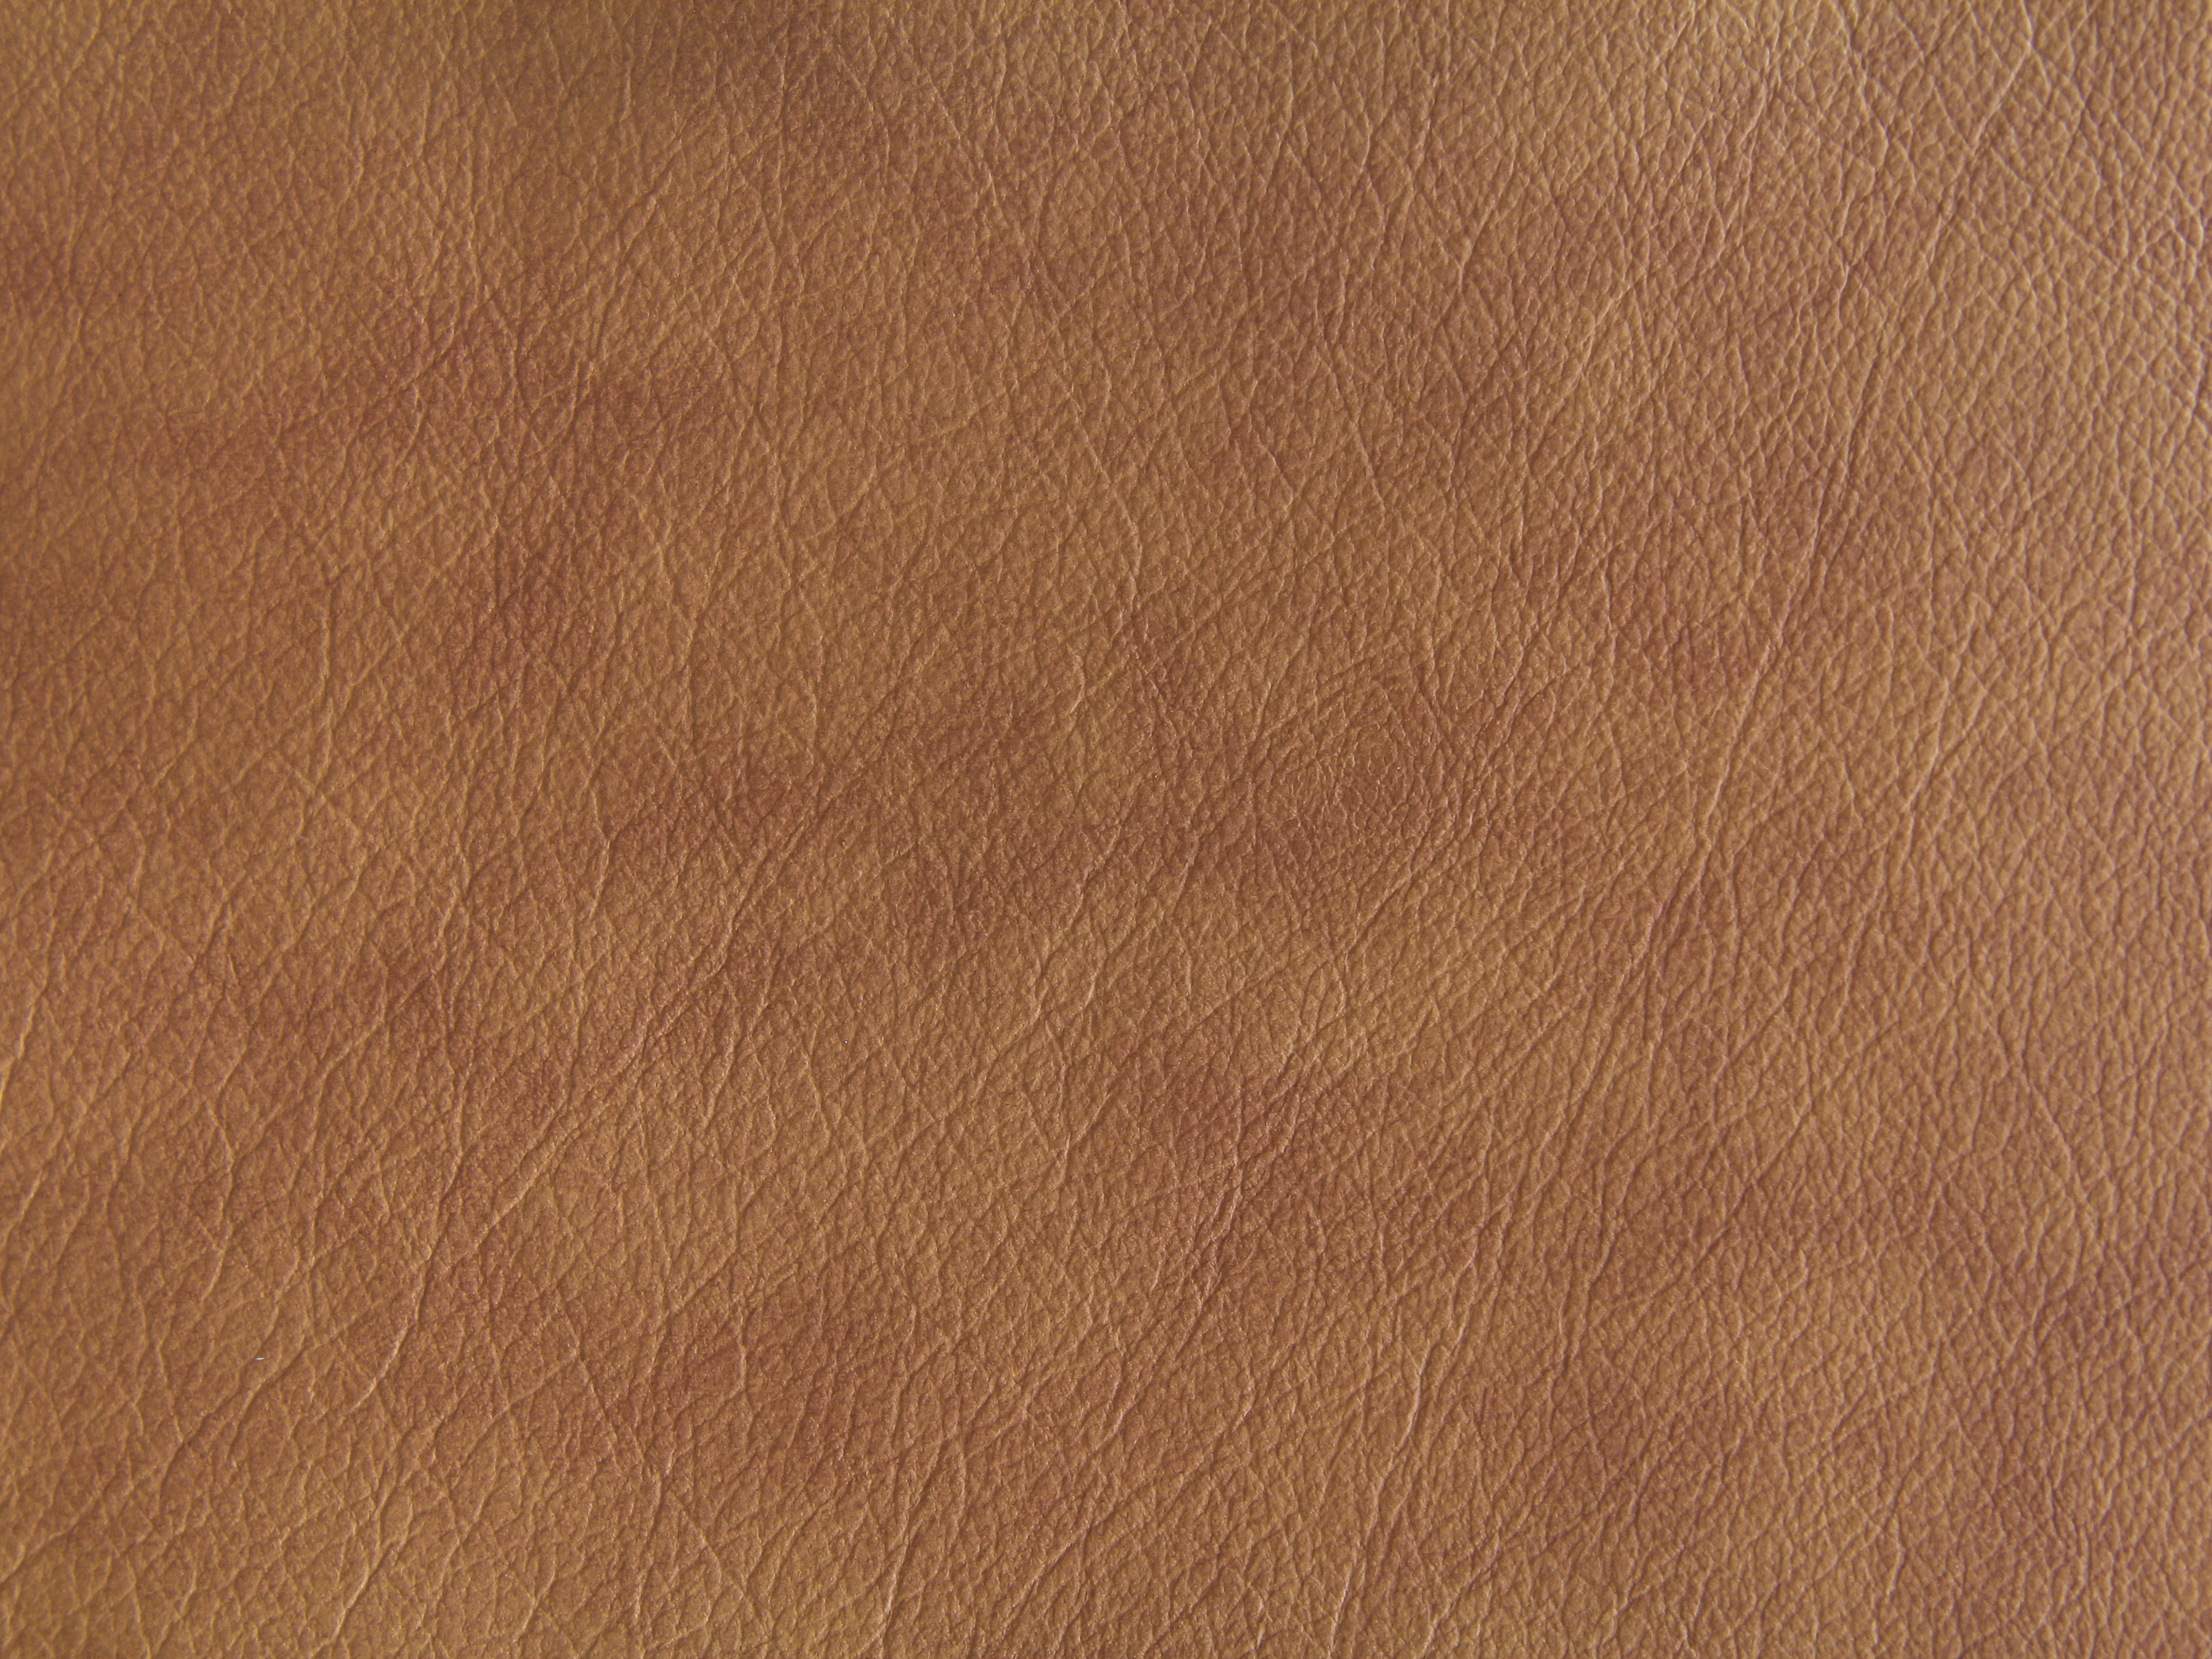 Leather Textures Coudy Brown Texture Wallpaper Fabric